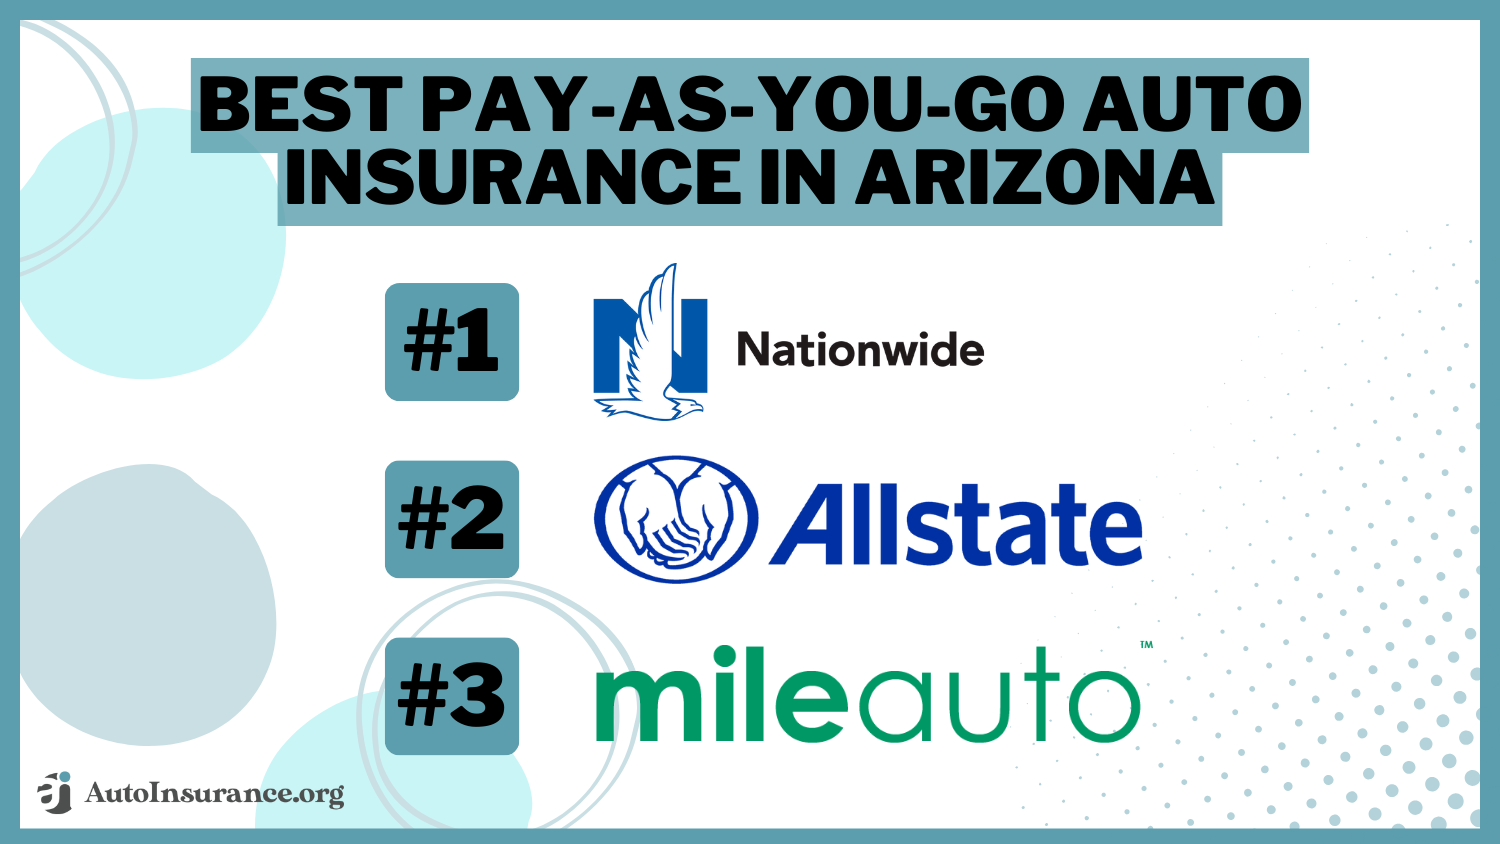 Best Pay-As-You-Go Auto Insurance in Arizona - Nationwide, Allstate, Mileauto